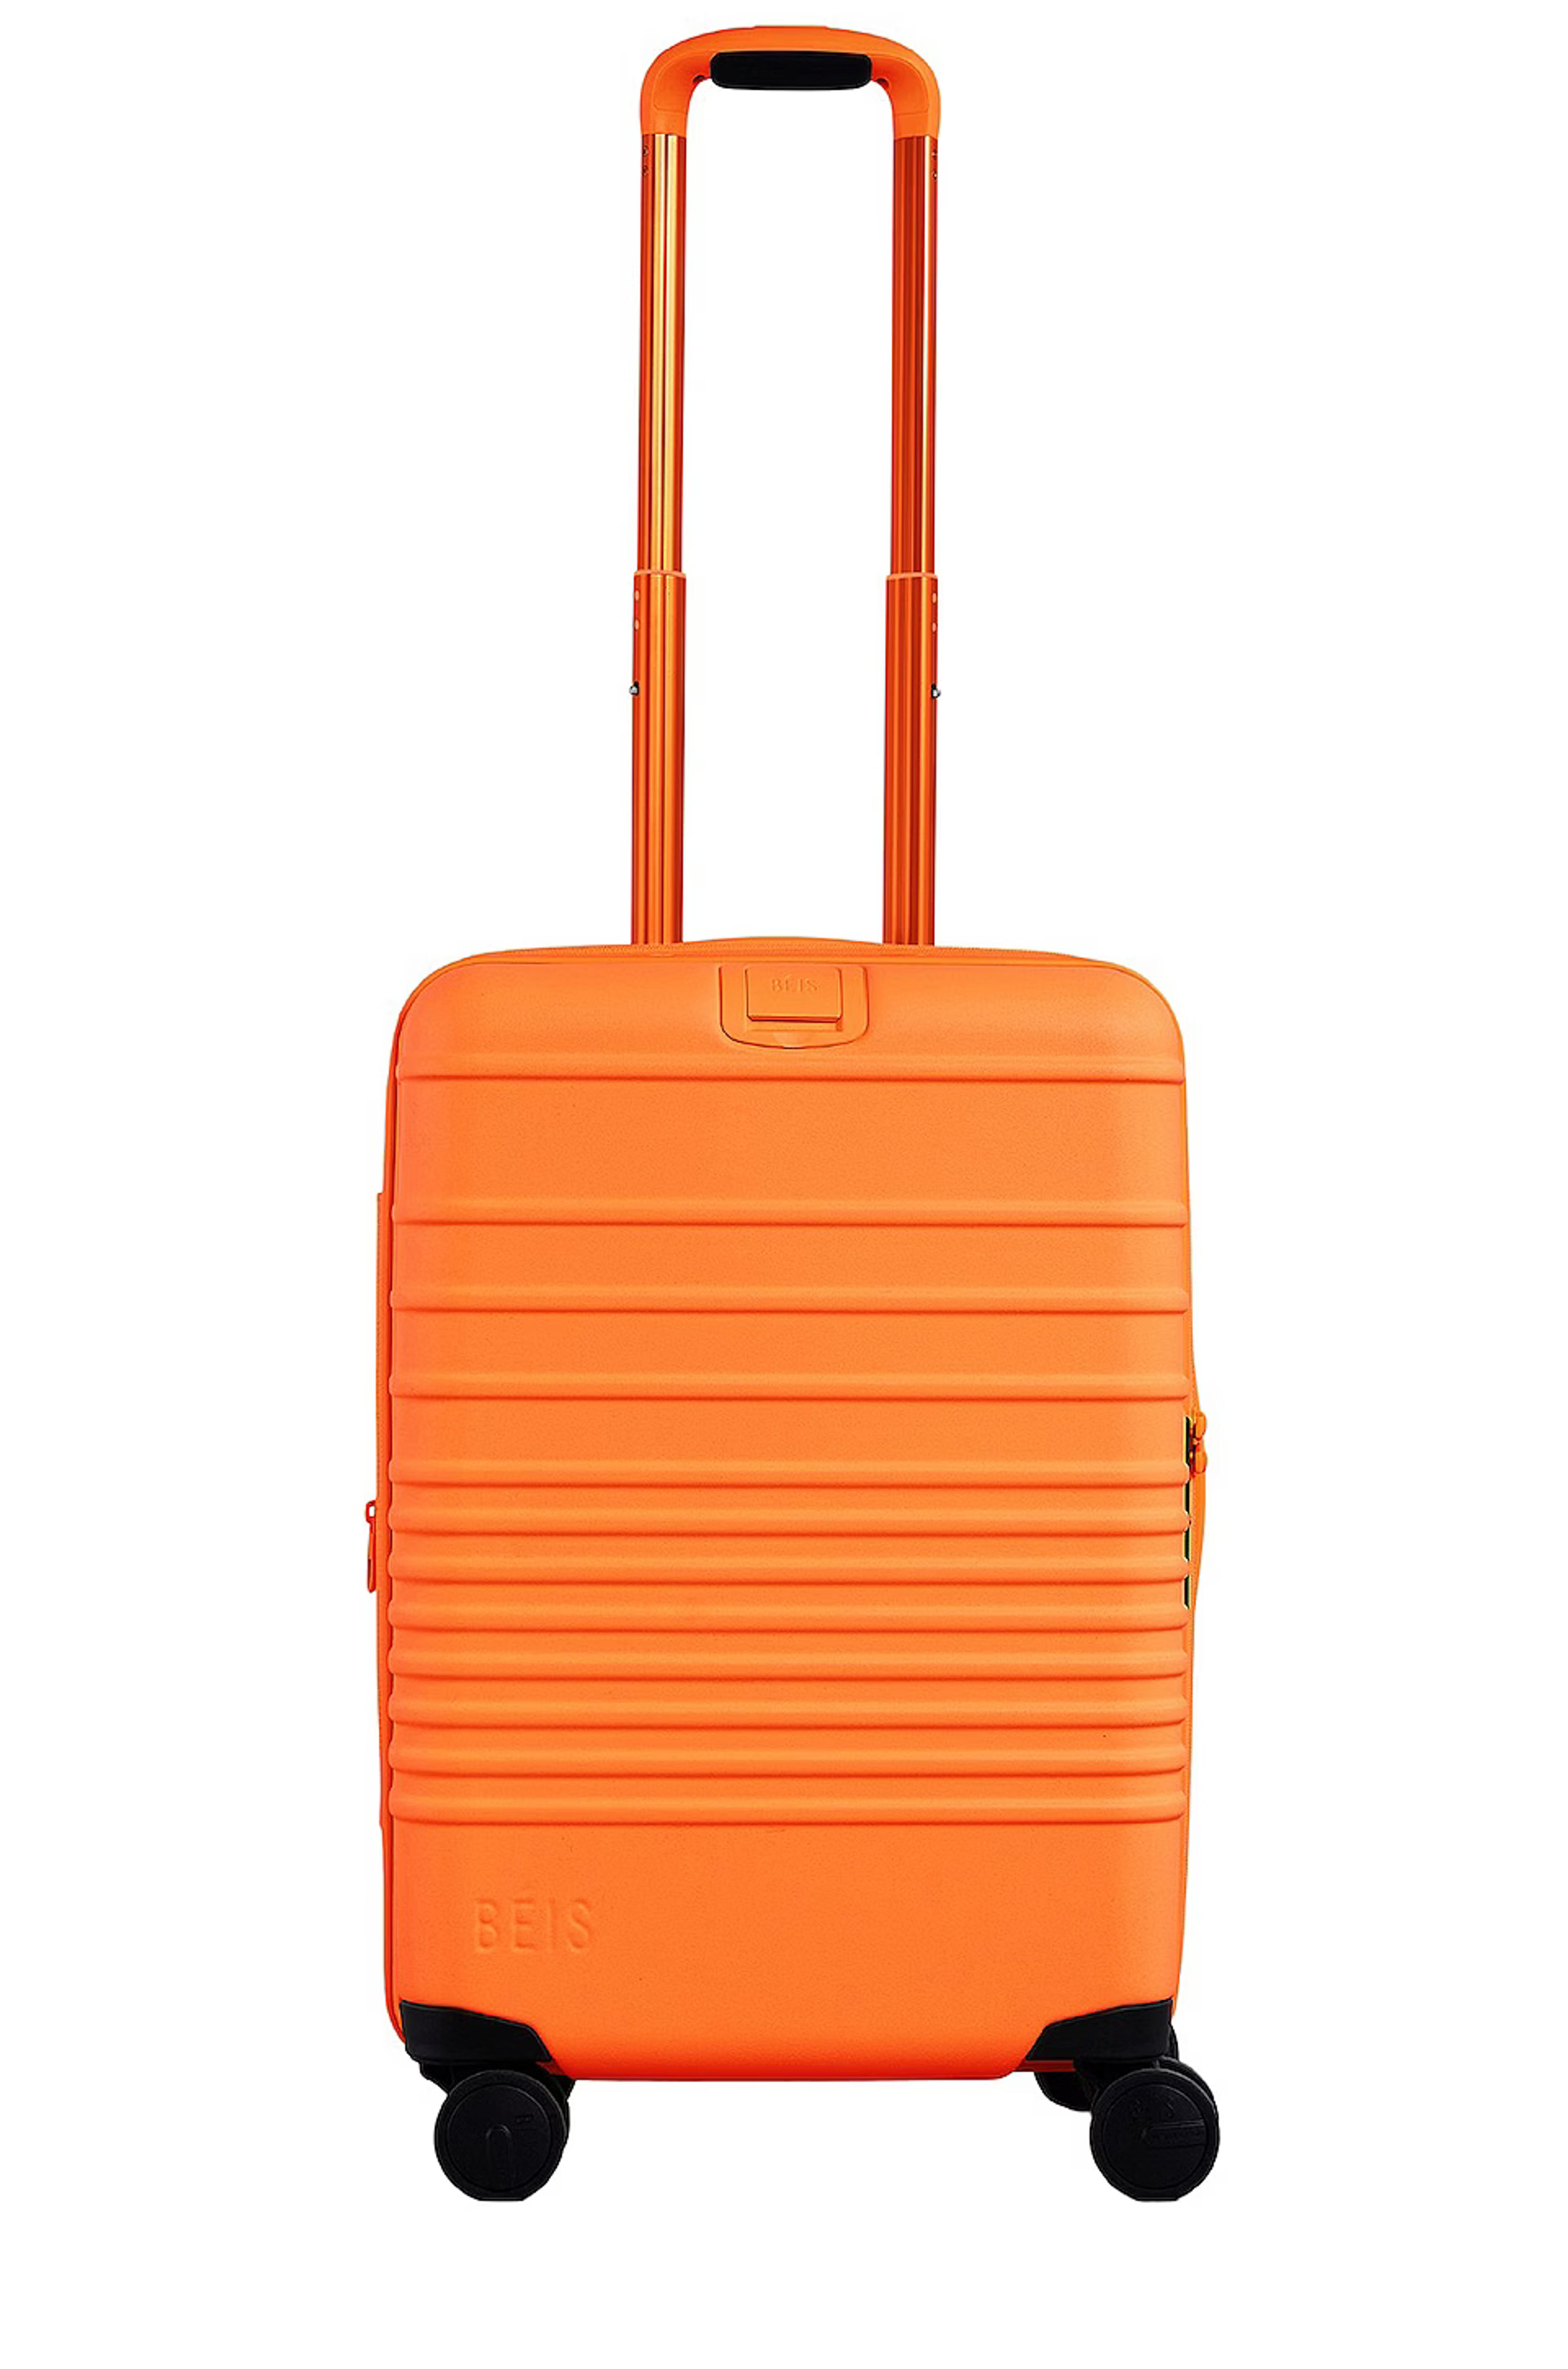 BEIS 21" Luggage in Creamsicle | REVOLVE